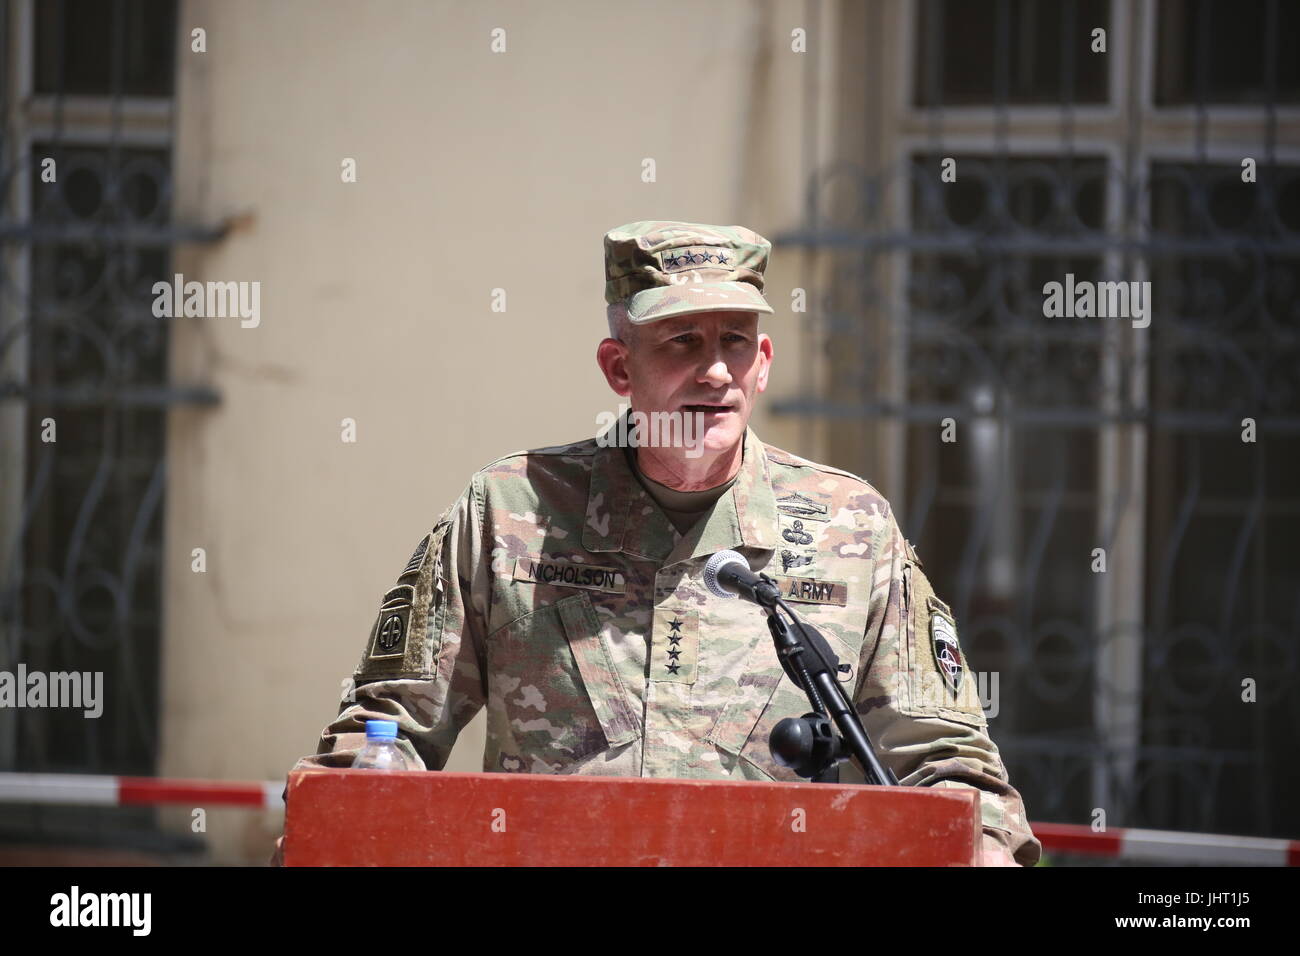 (170715) -- KABUL, July 15 (Xinhua) -- General John Nicholson, the U.S. and NATO commander in Afghanistan, speaks during change of command ceremony in Resolute Support headquarter in Kabul, Afghanistan, July 15, 2017. (Xinhua/Rahmat Alizadah)(rh) Stock Photo